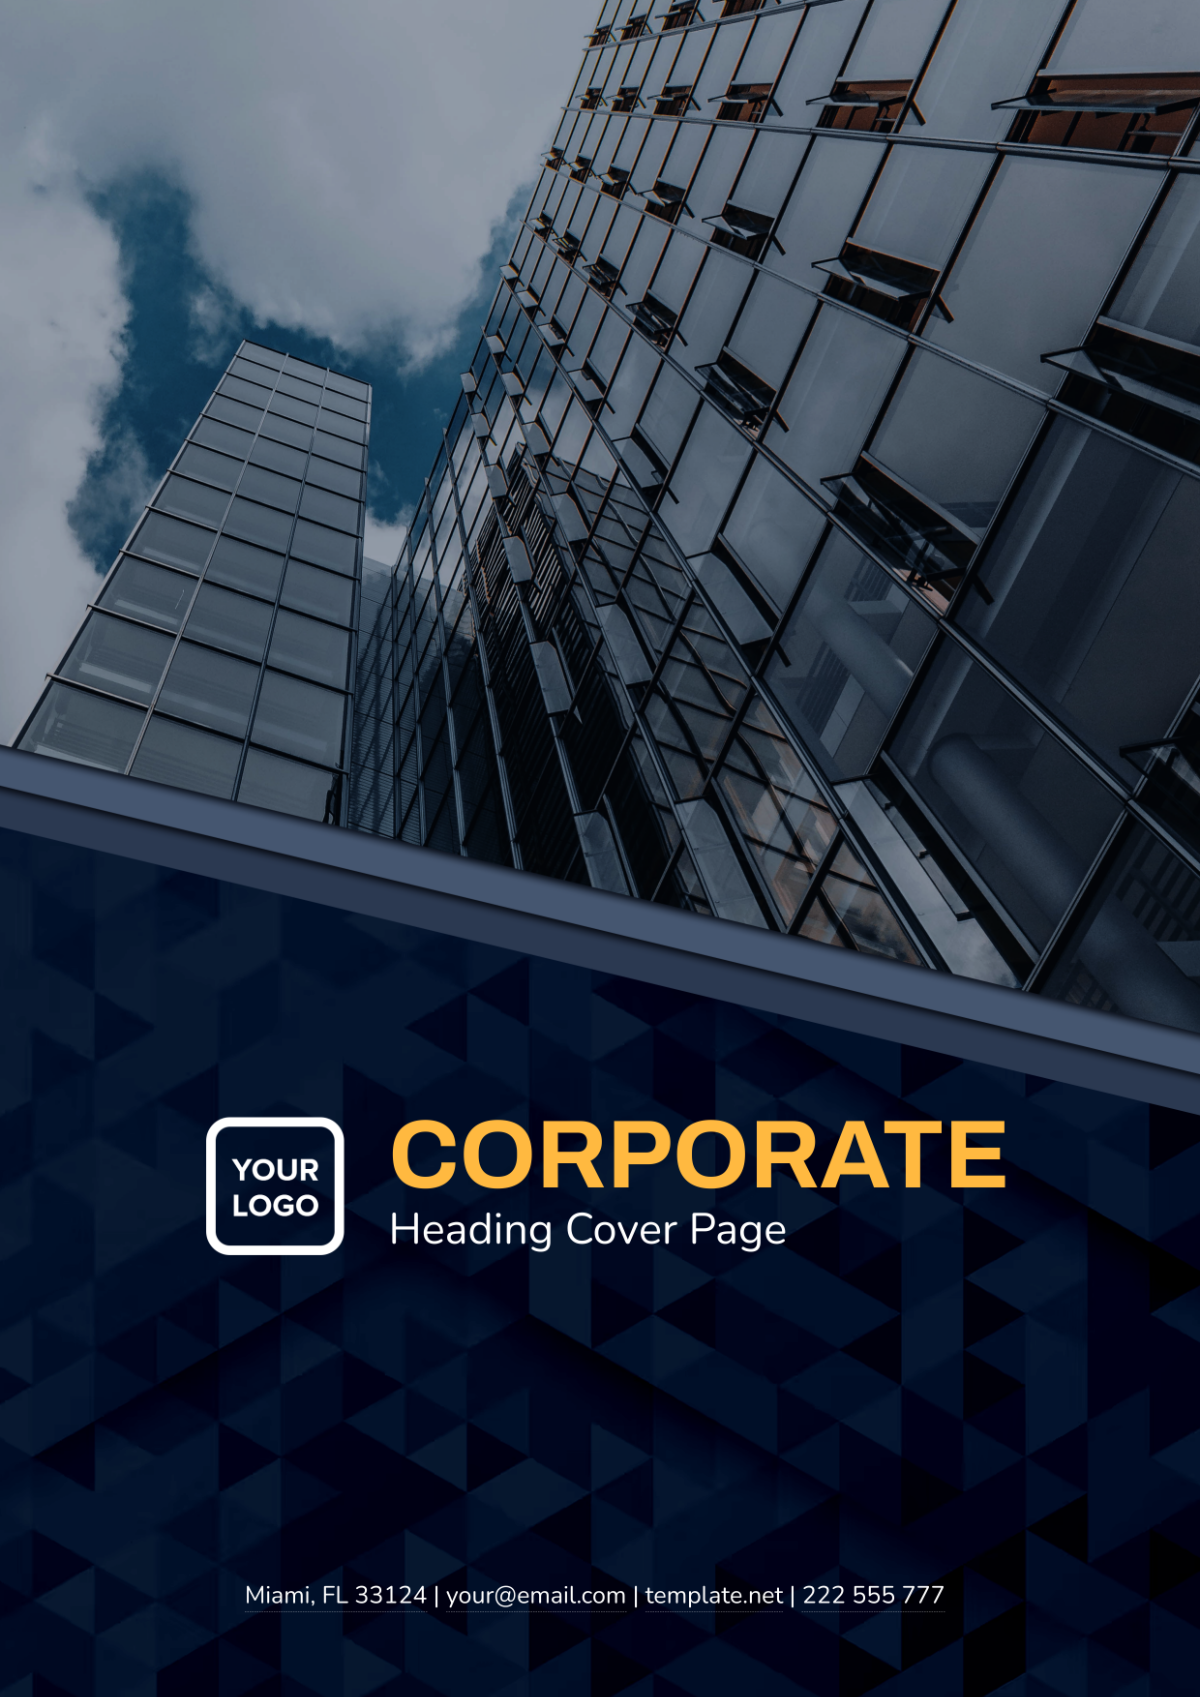 Free Corporate Heading Cover Page Template